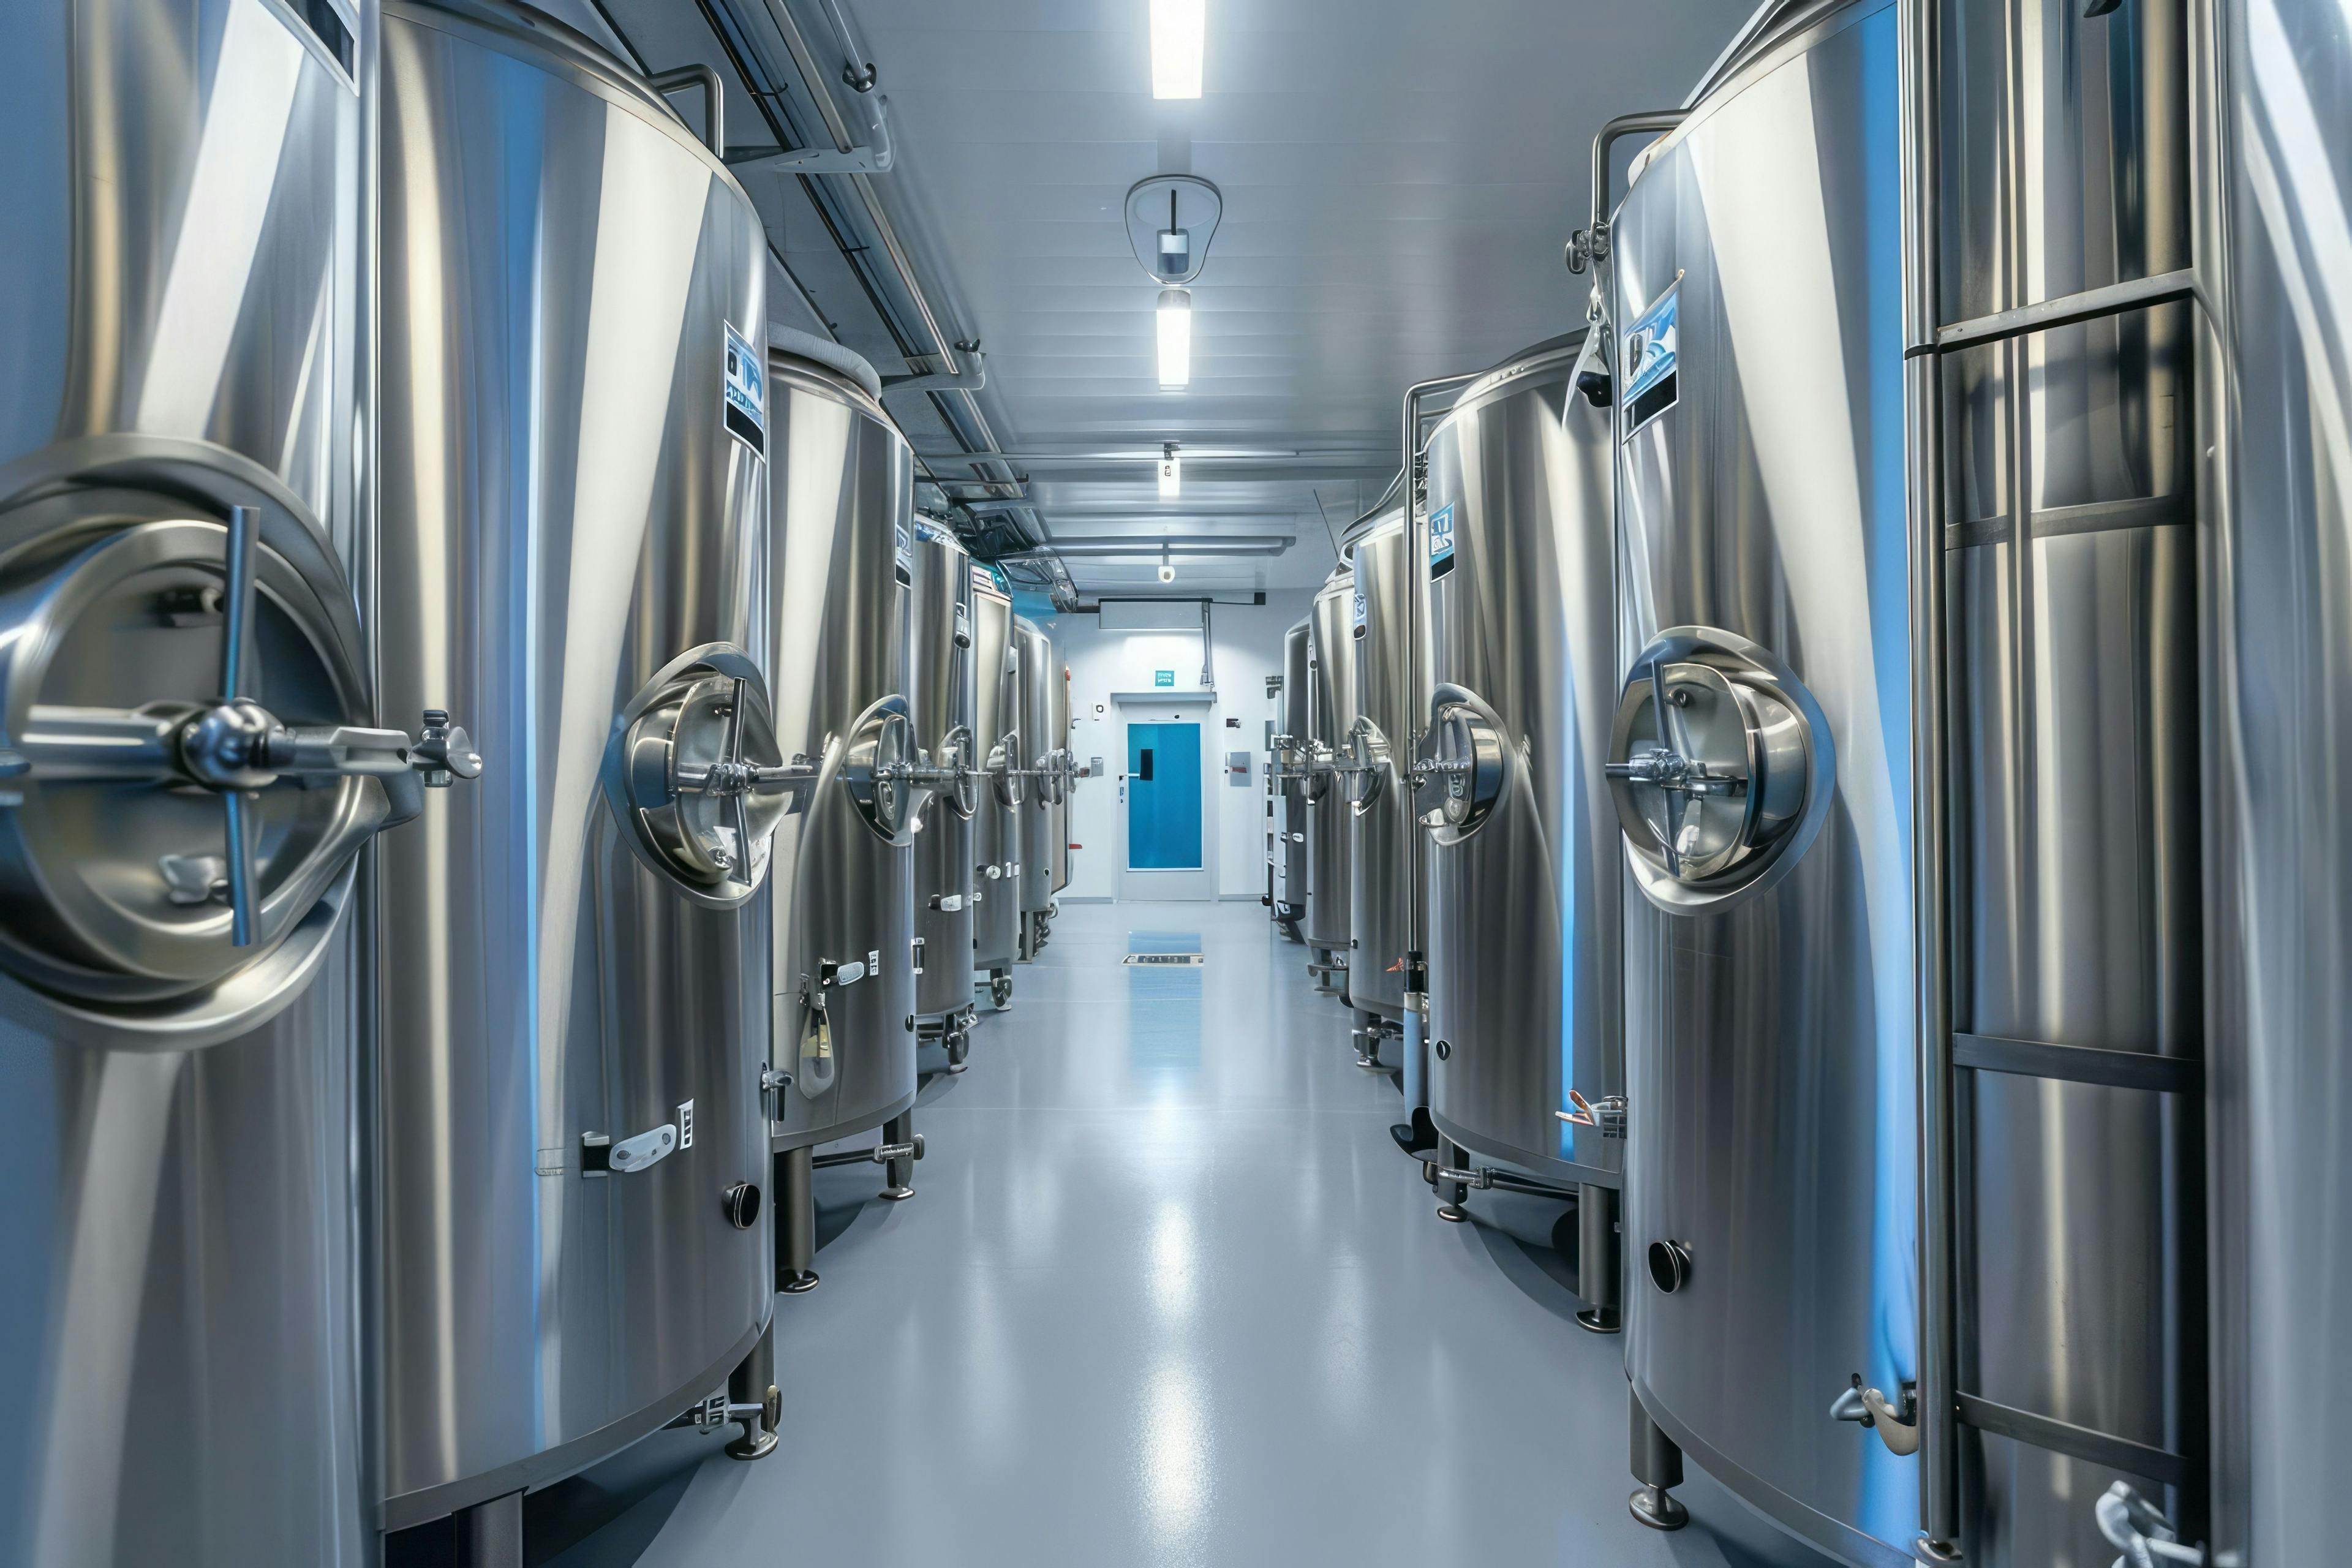 Fermentation tanks in a biotech facility, producing pharmaceuticals, industrial bioprocessing. © DK_2020 - stock.adobe.com